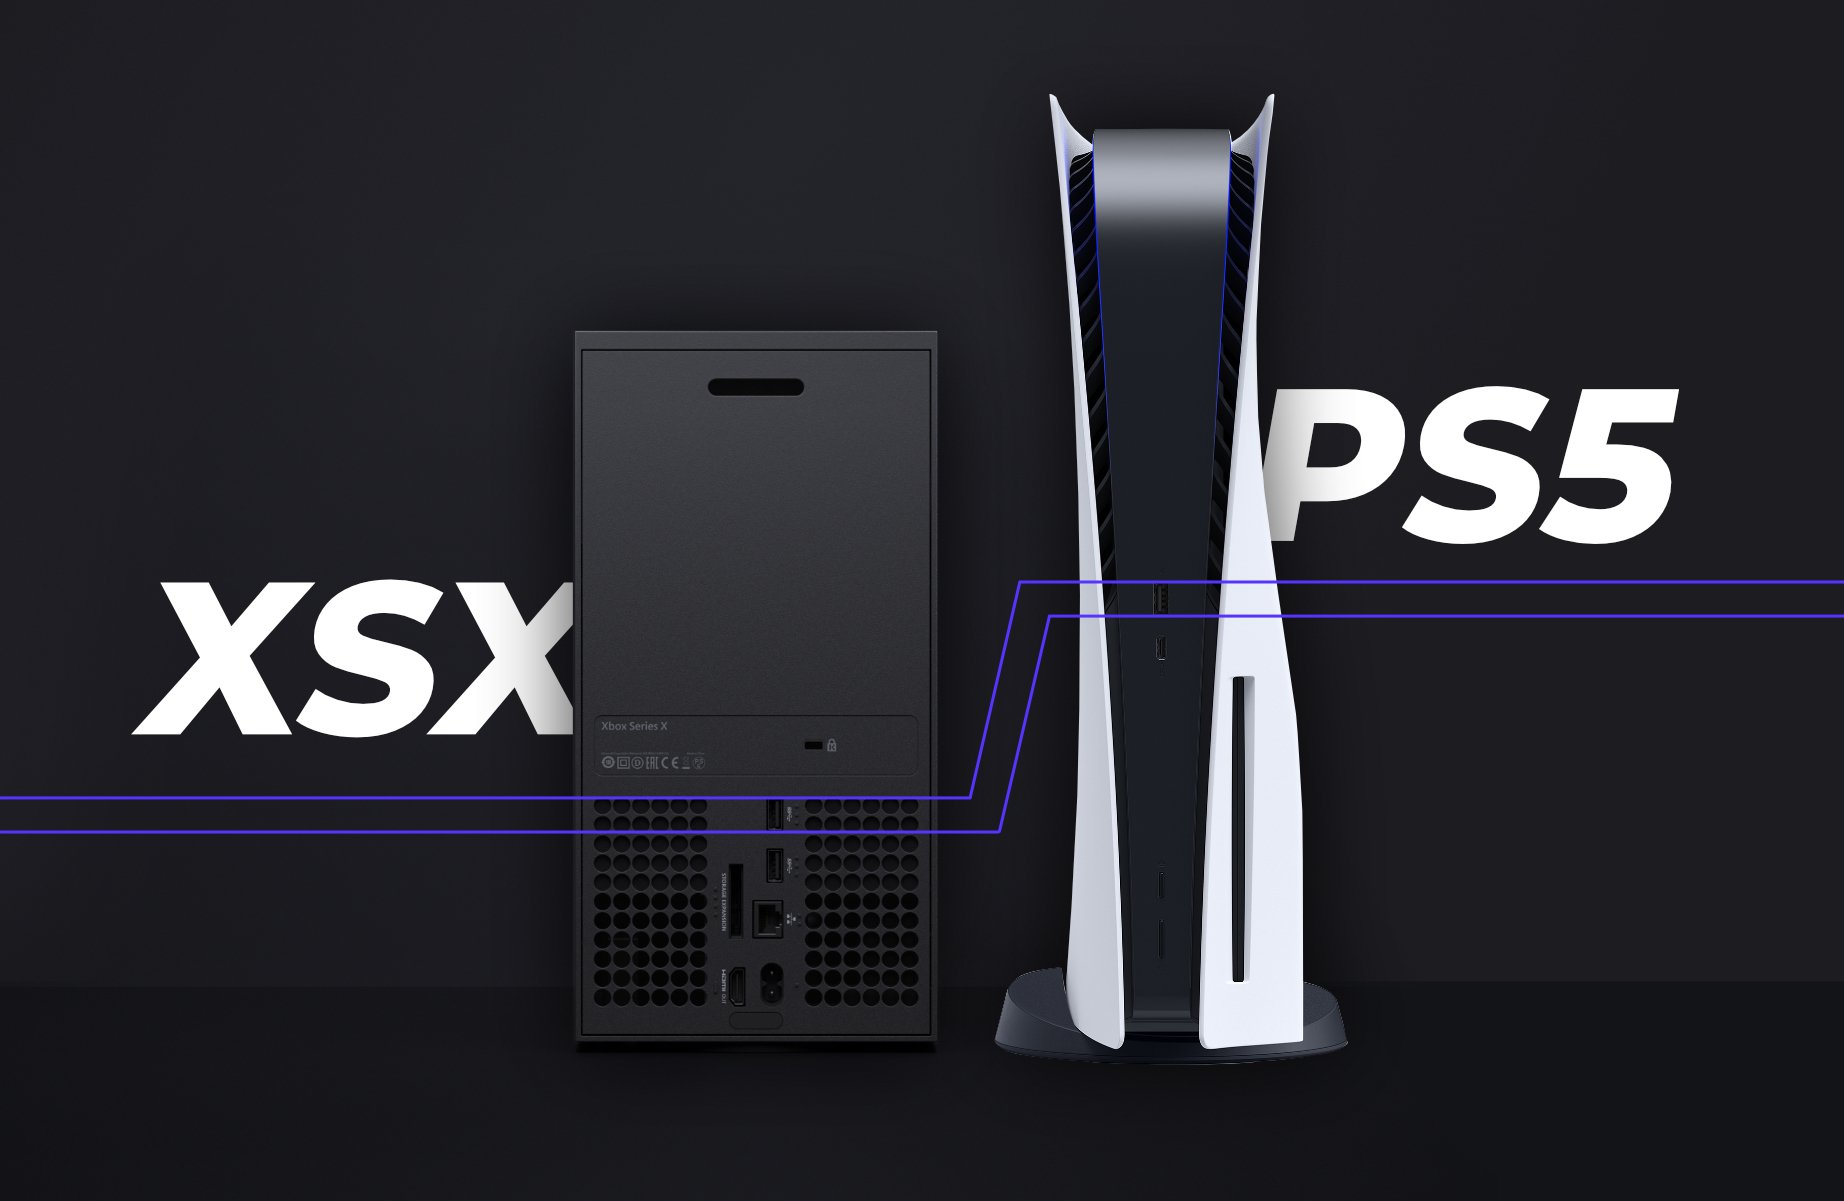 Will Ps5 Be Available For Christmas